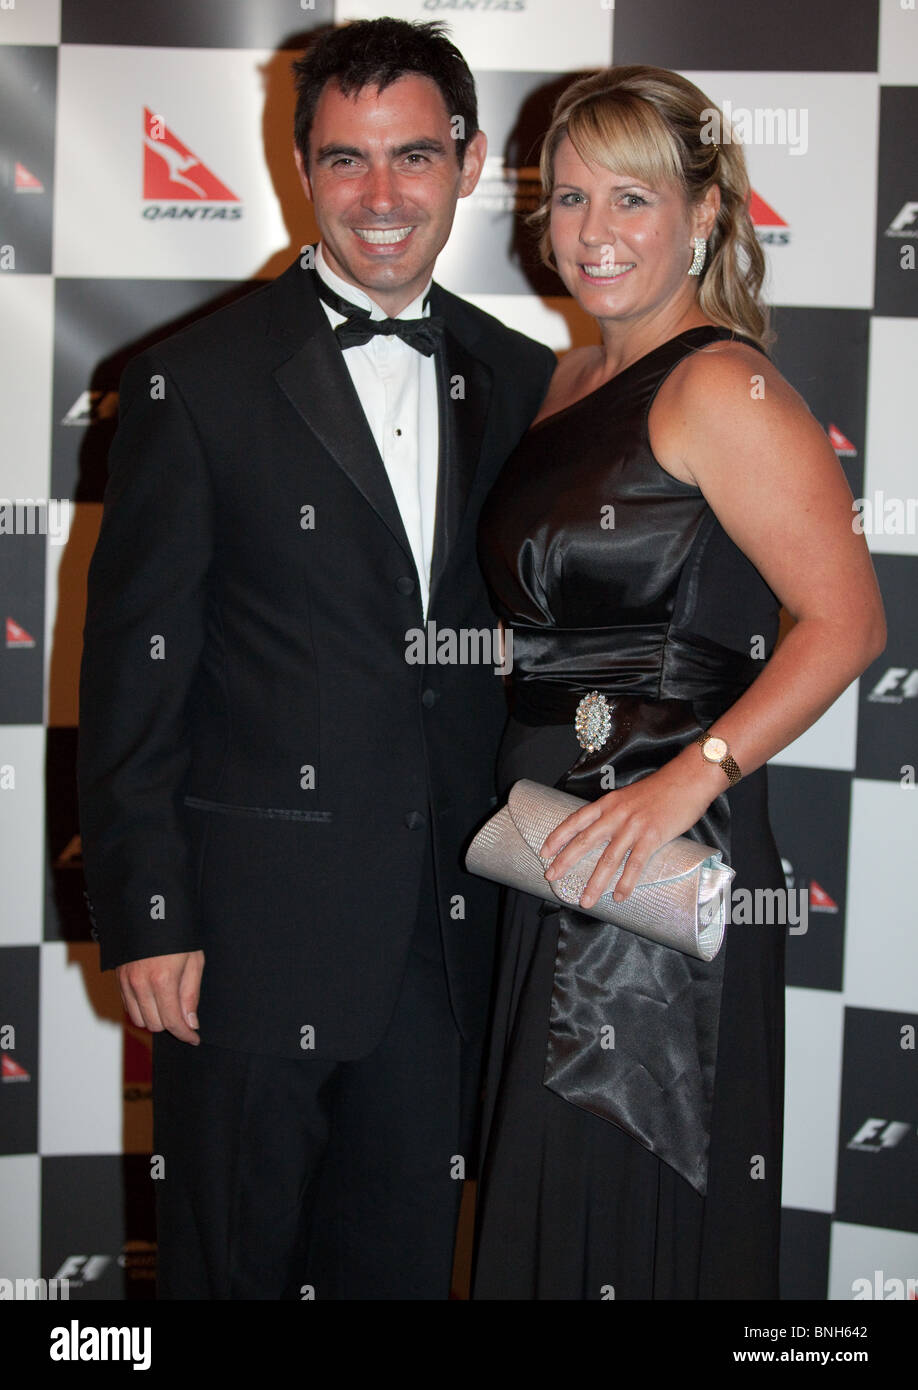 Tim Holding and guest at the F1 Grand Prix Ball, Melbourne, Friday March 26, 2010 Stock Photo